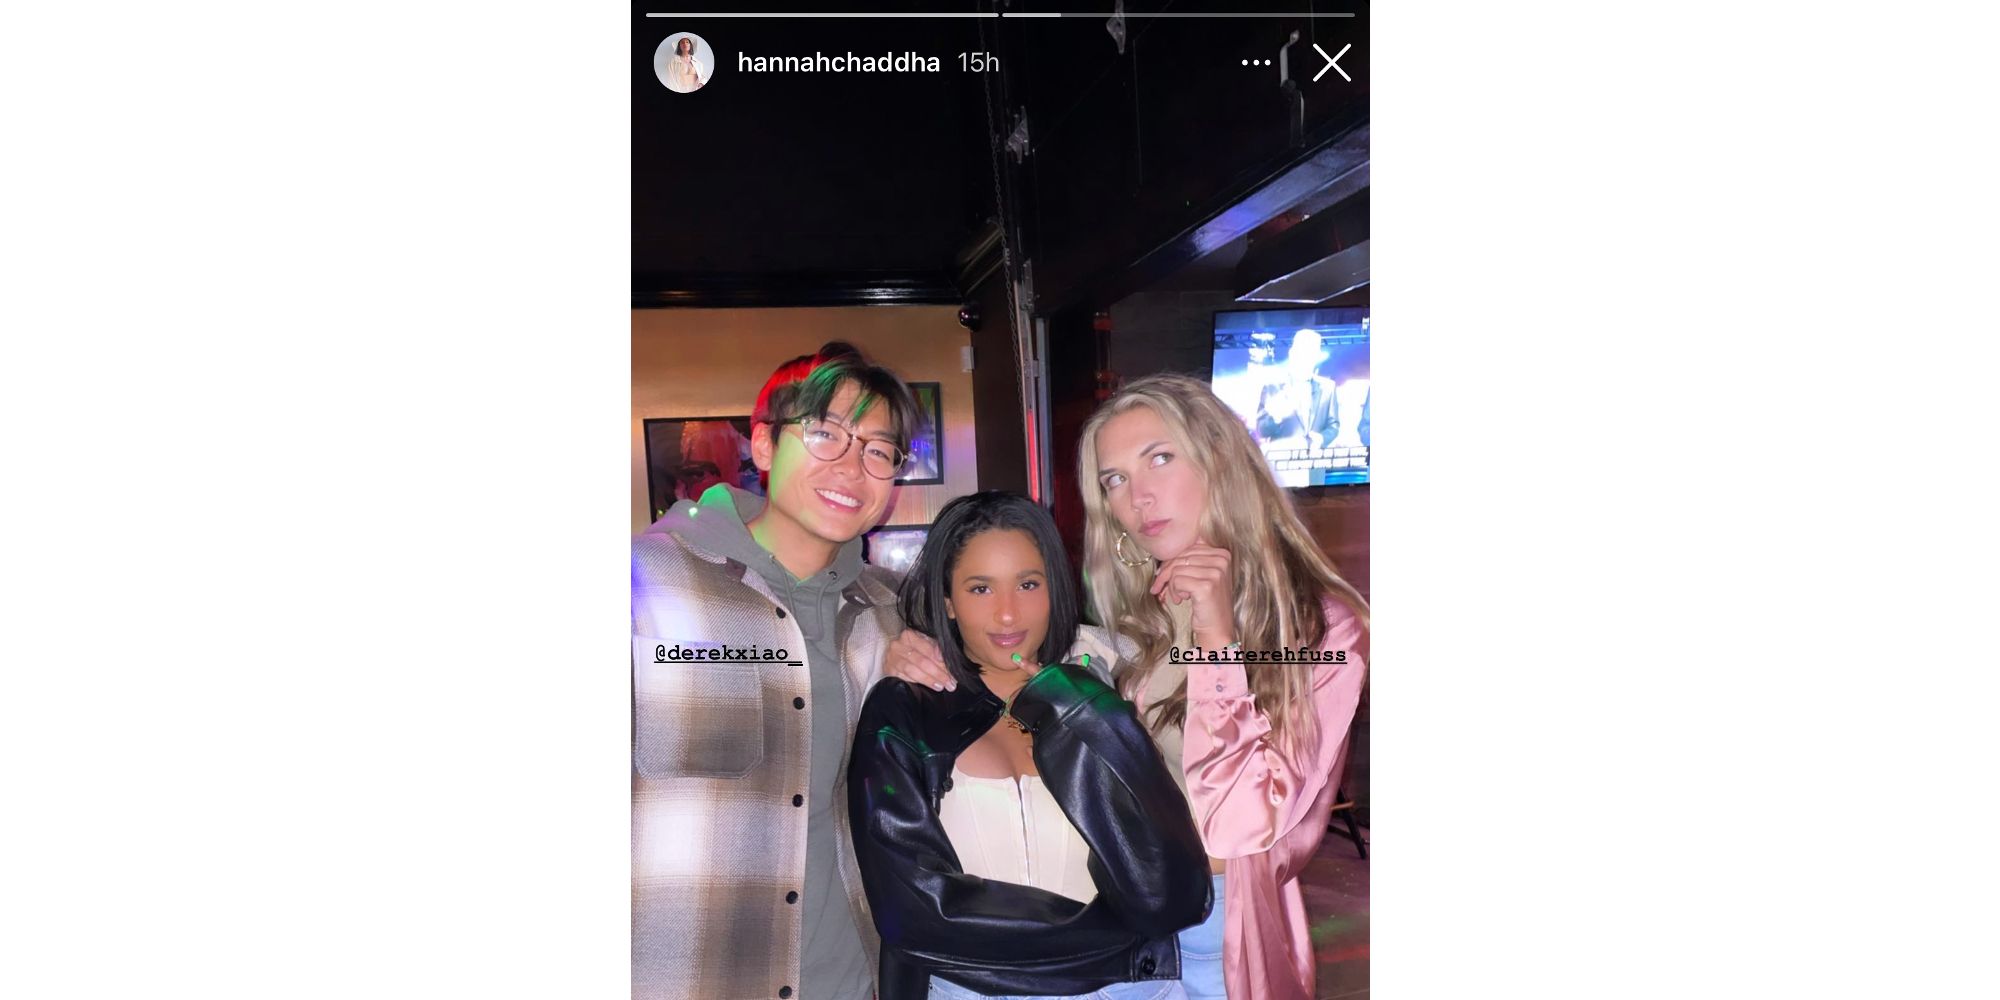 Derek Xiao, Hannah Chaddha, and Claire Rehfuss from Big Brother 23 together via Instagram Story